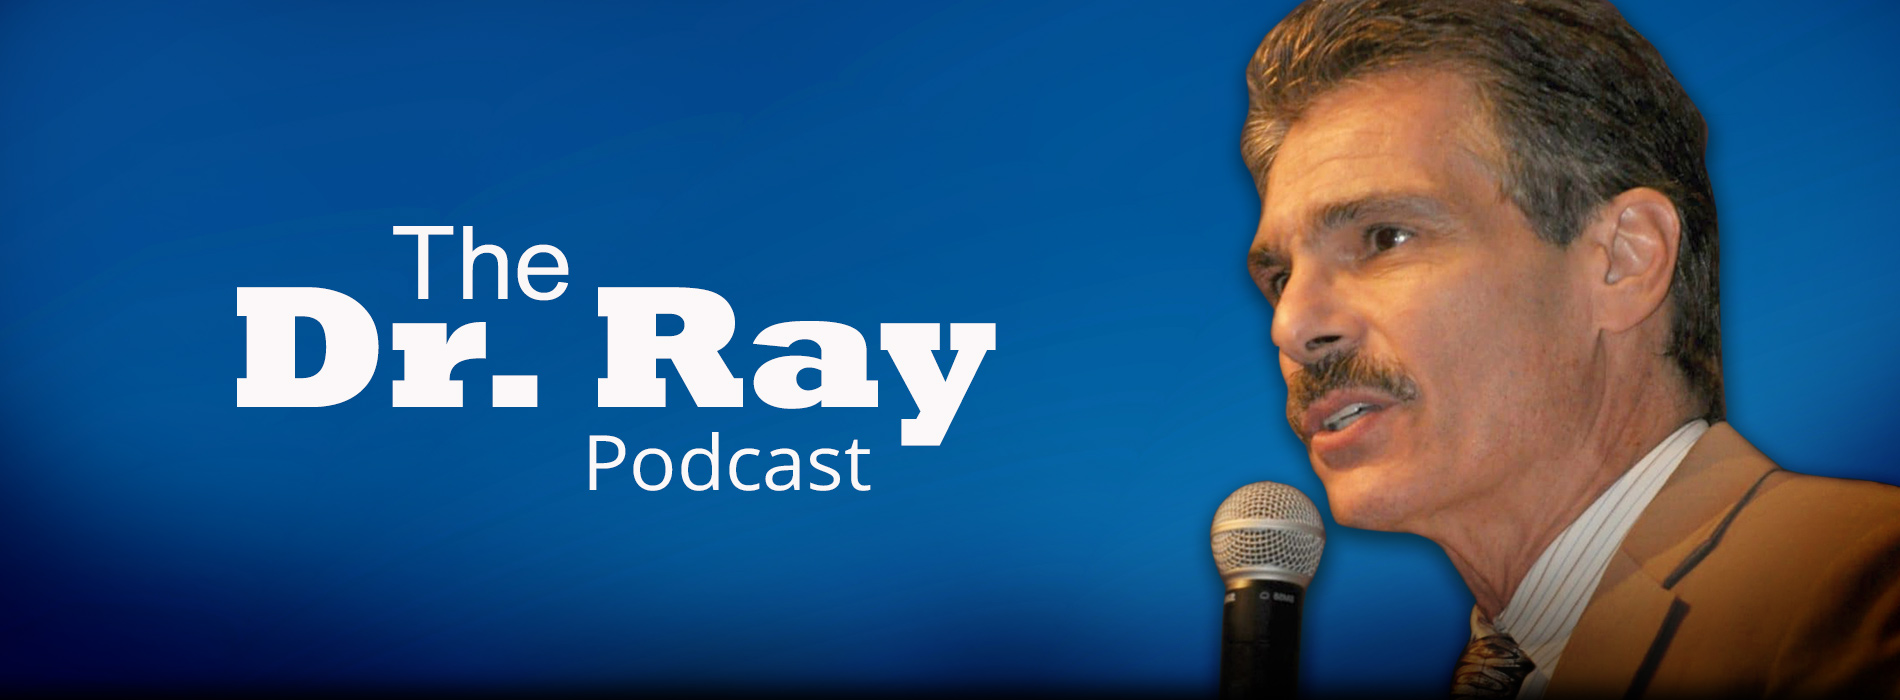 The Dr. Ray Podcast